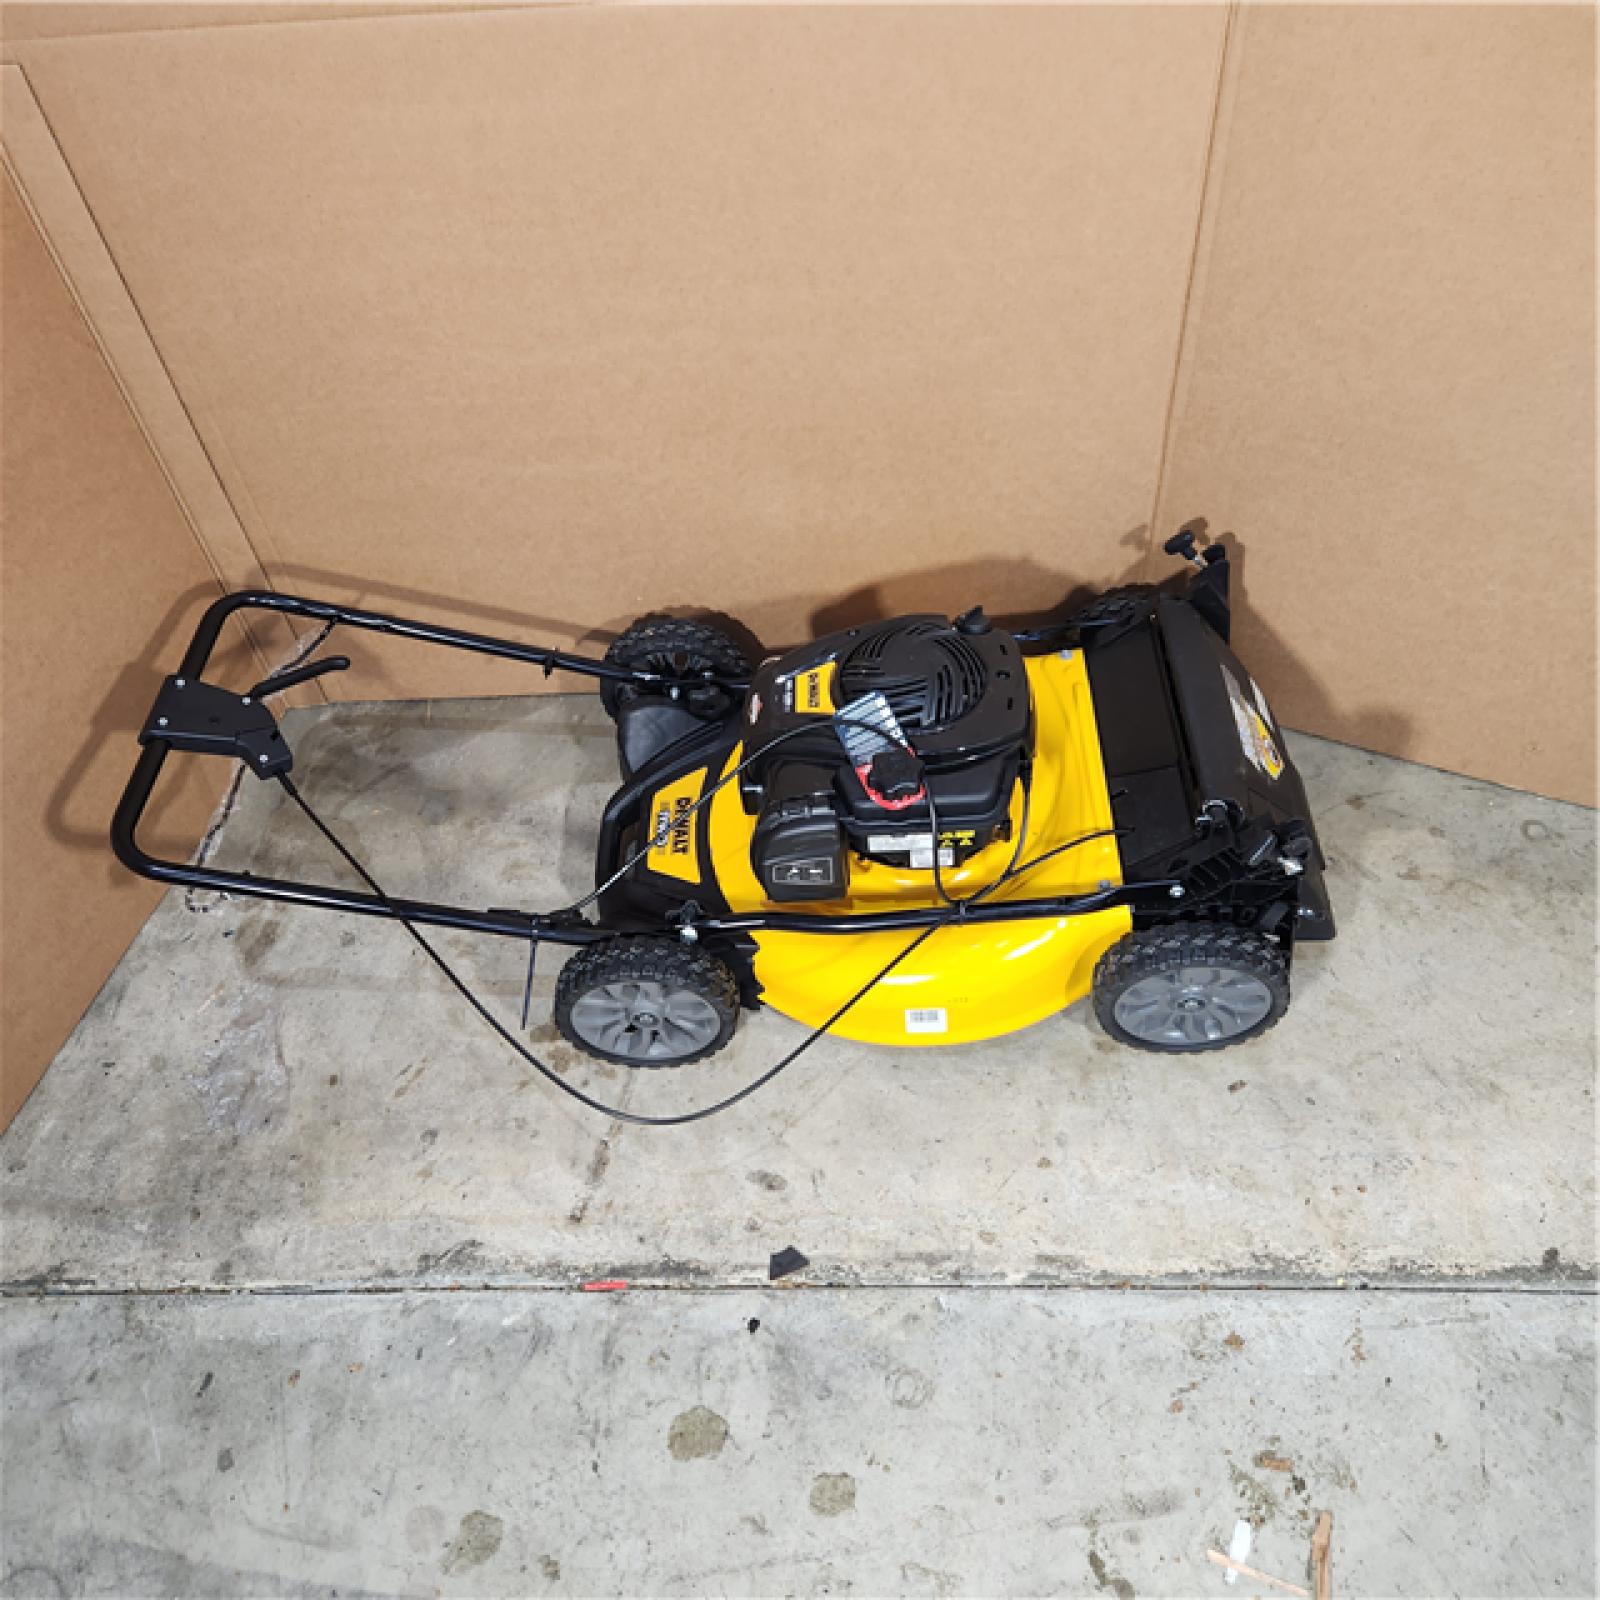 Houston Location - As-Is Dewalt Lawn Mower 150cc - Appears IN NEW Condition